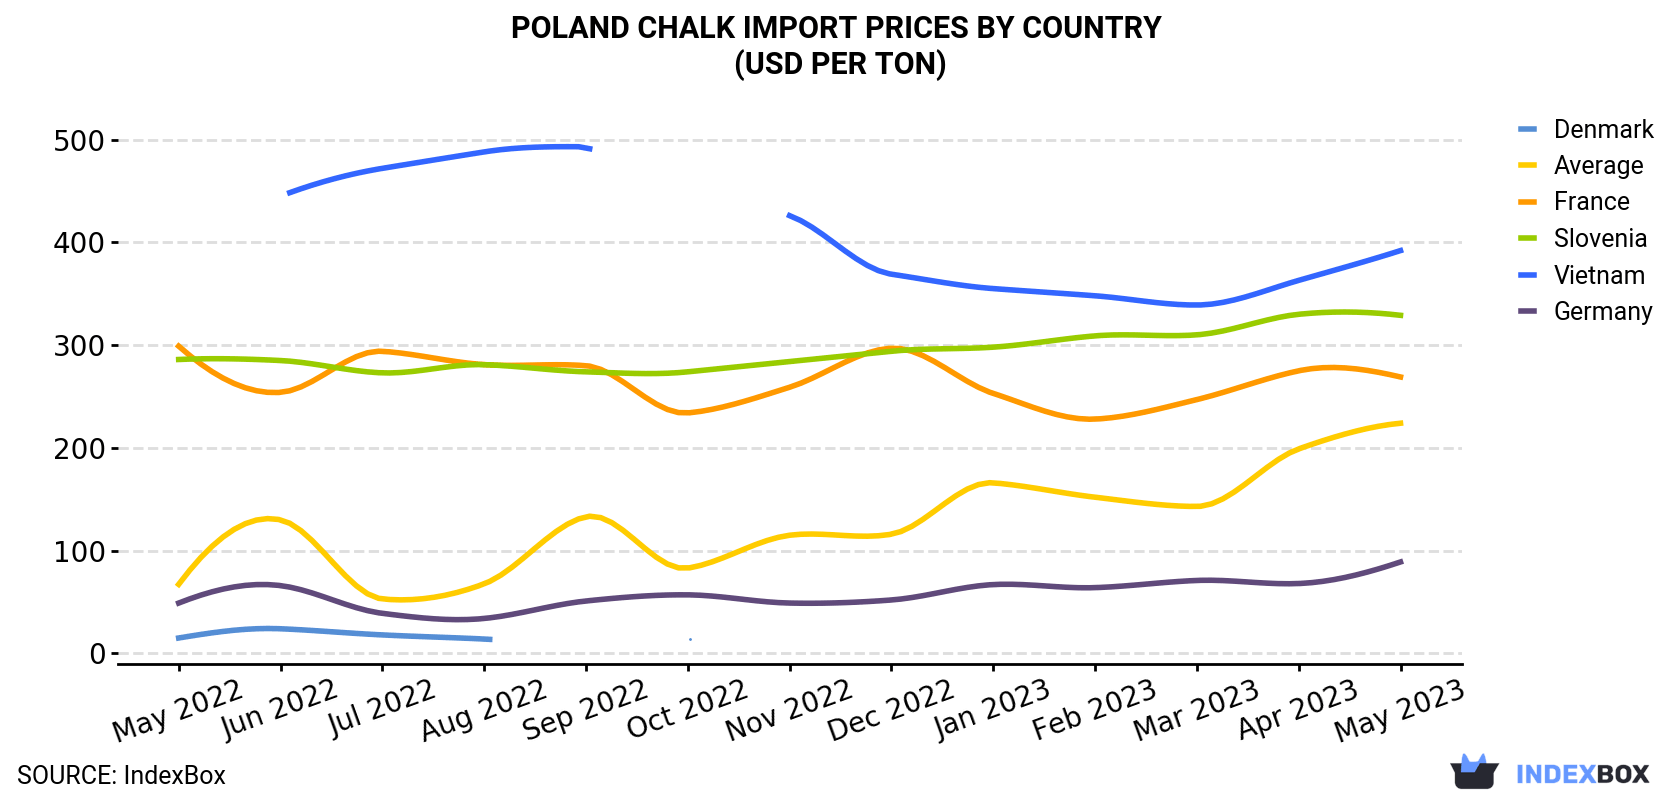 Poland Chalk Import Prices By Country (USD Per Ton)